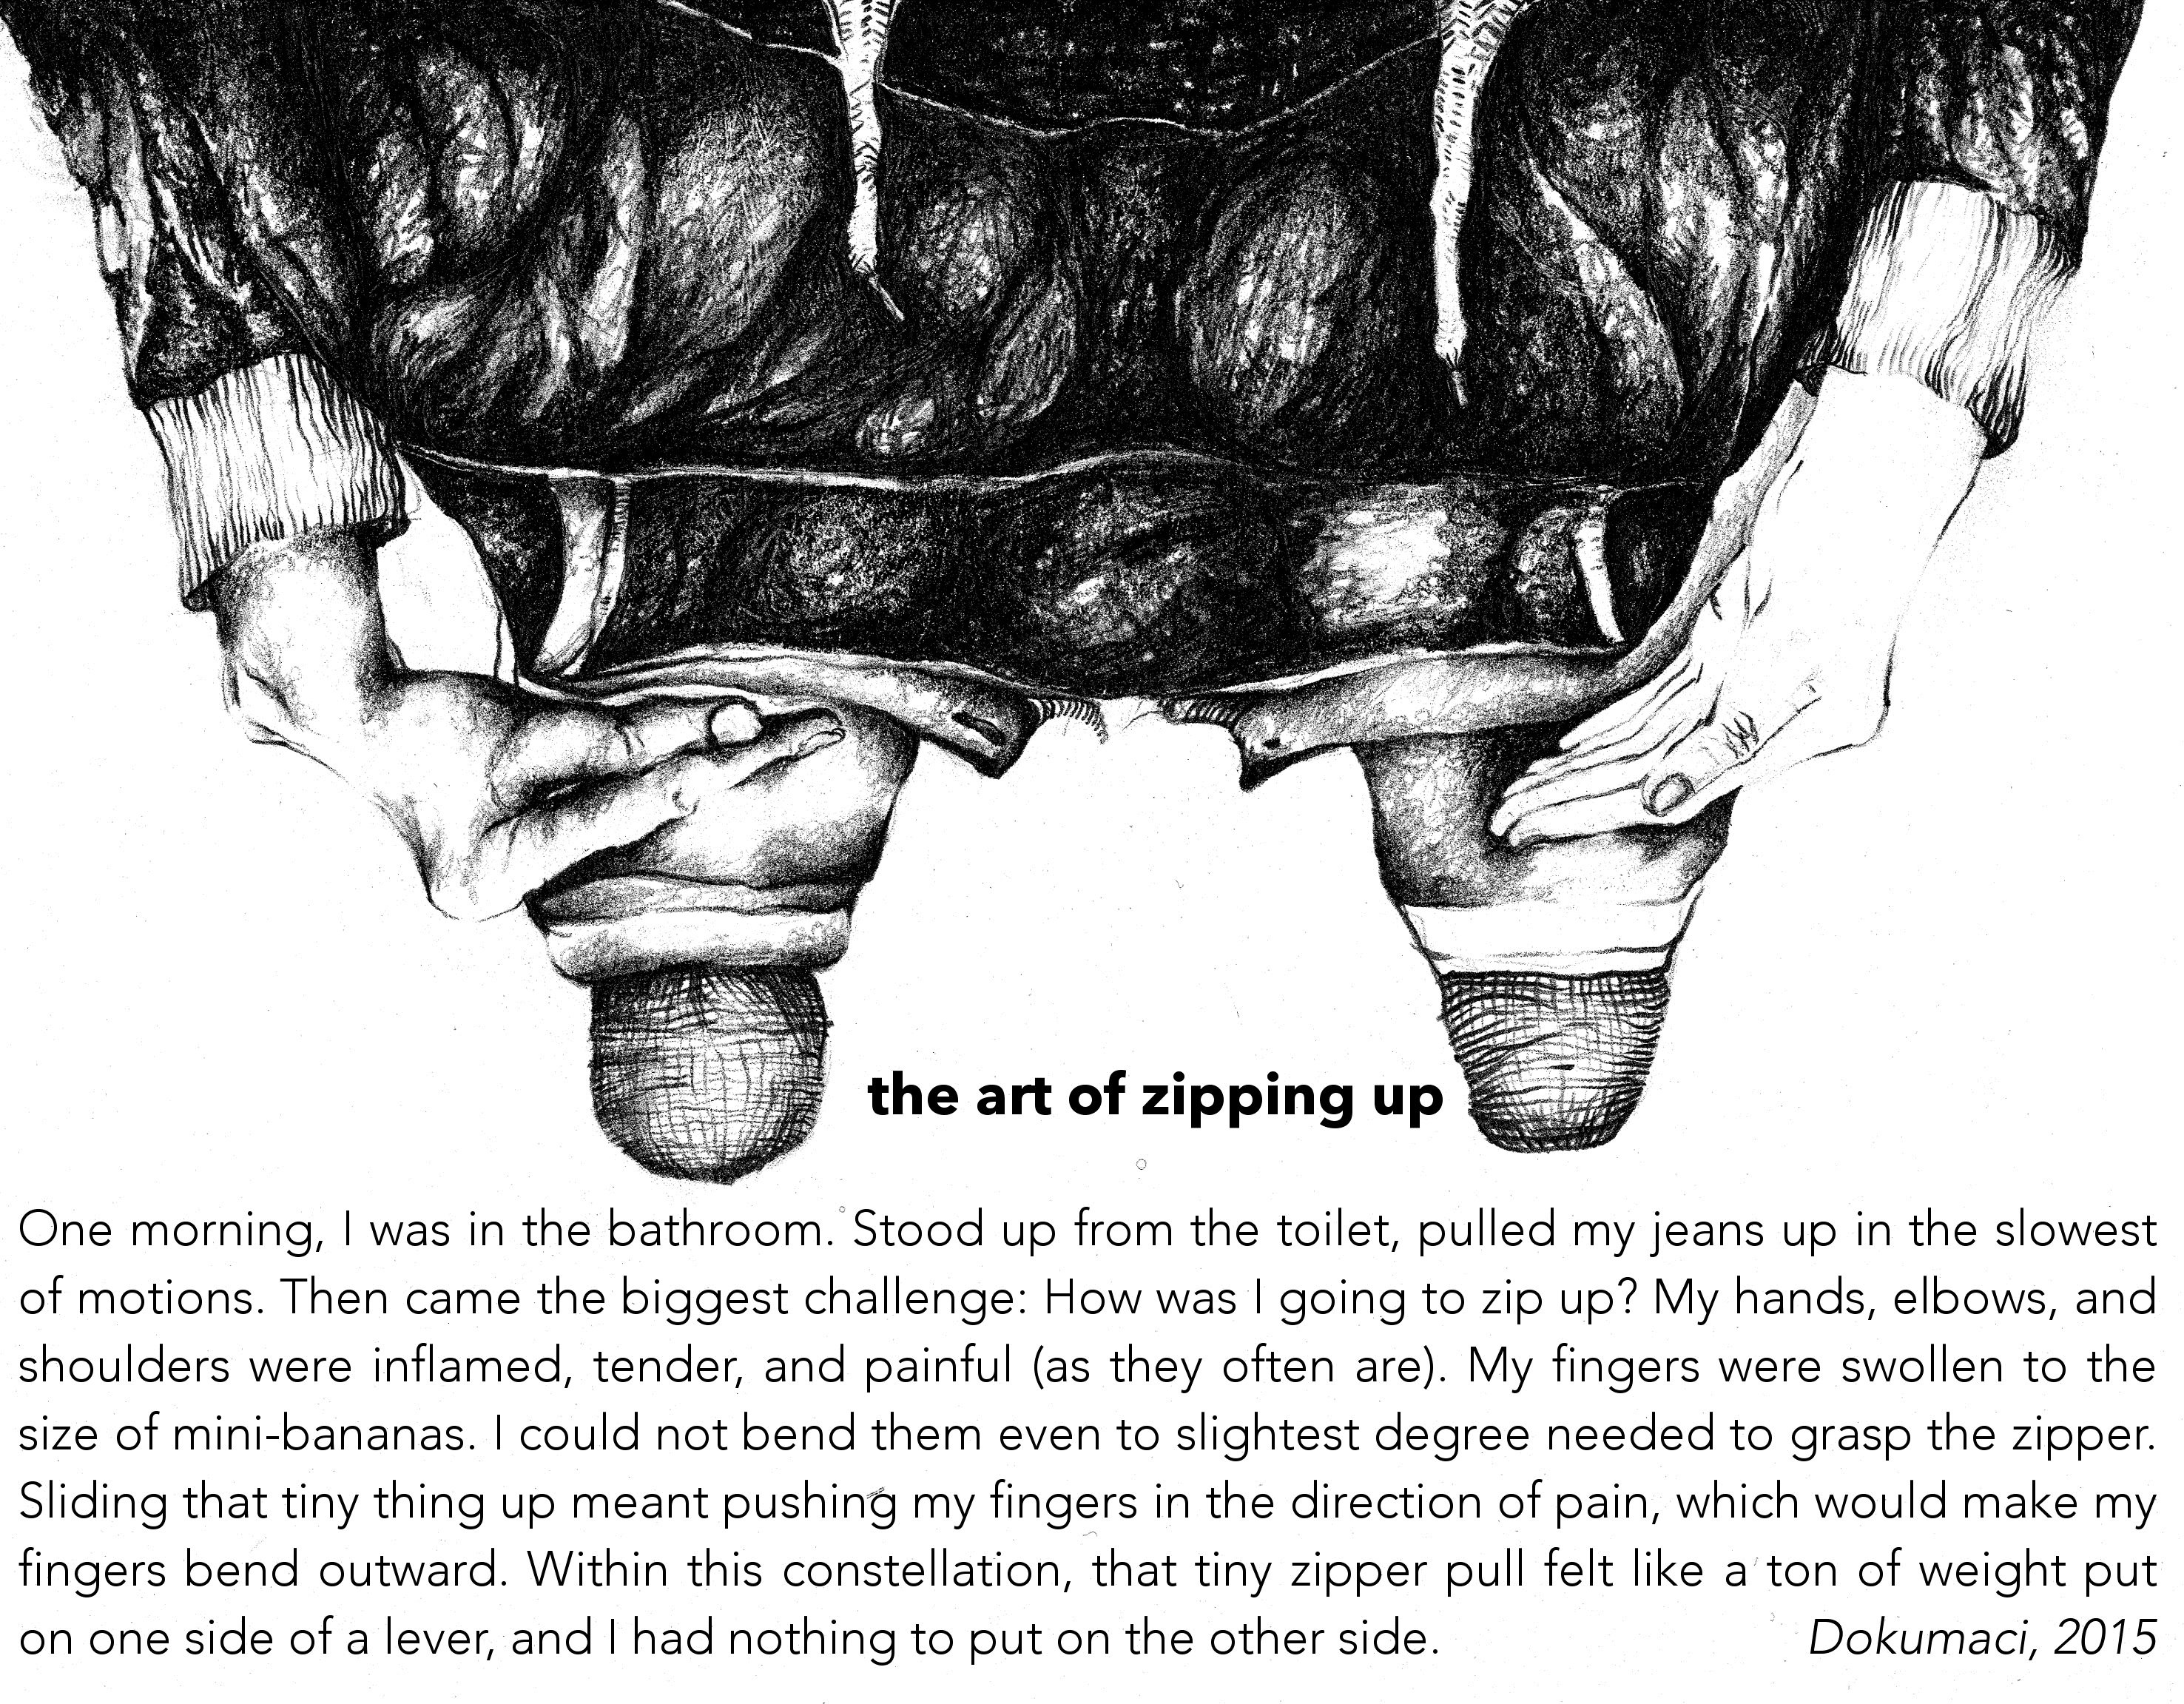 The Art of Zipping Up